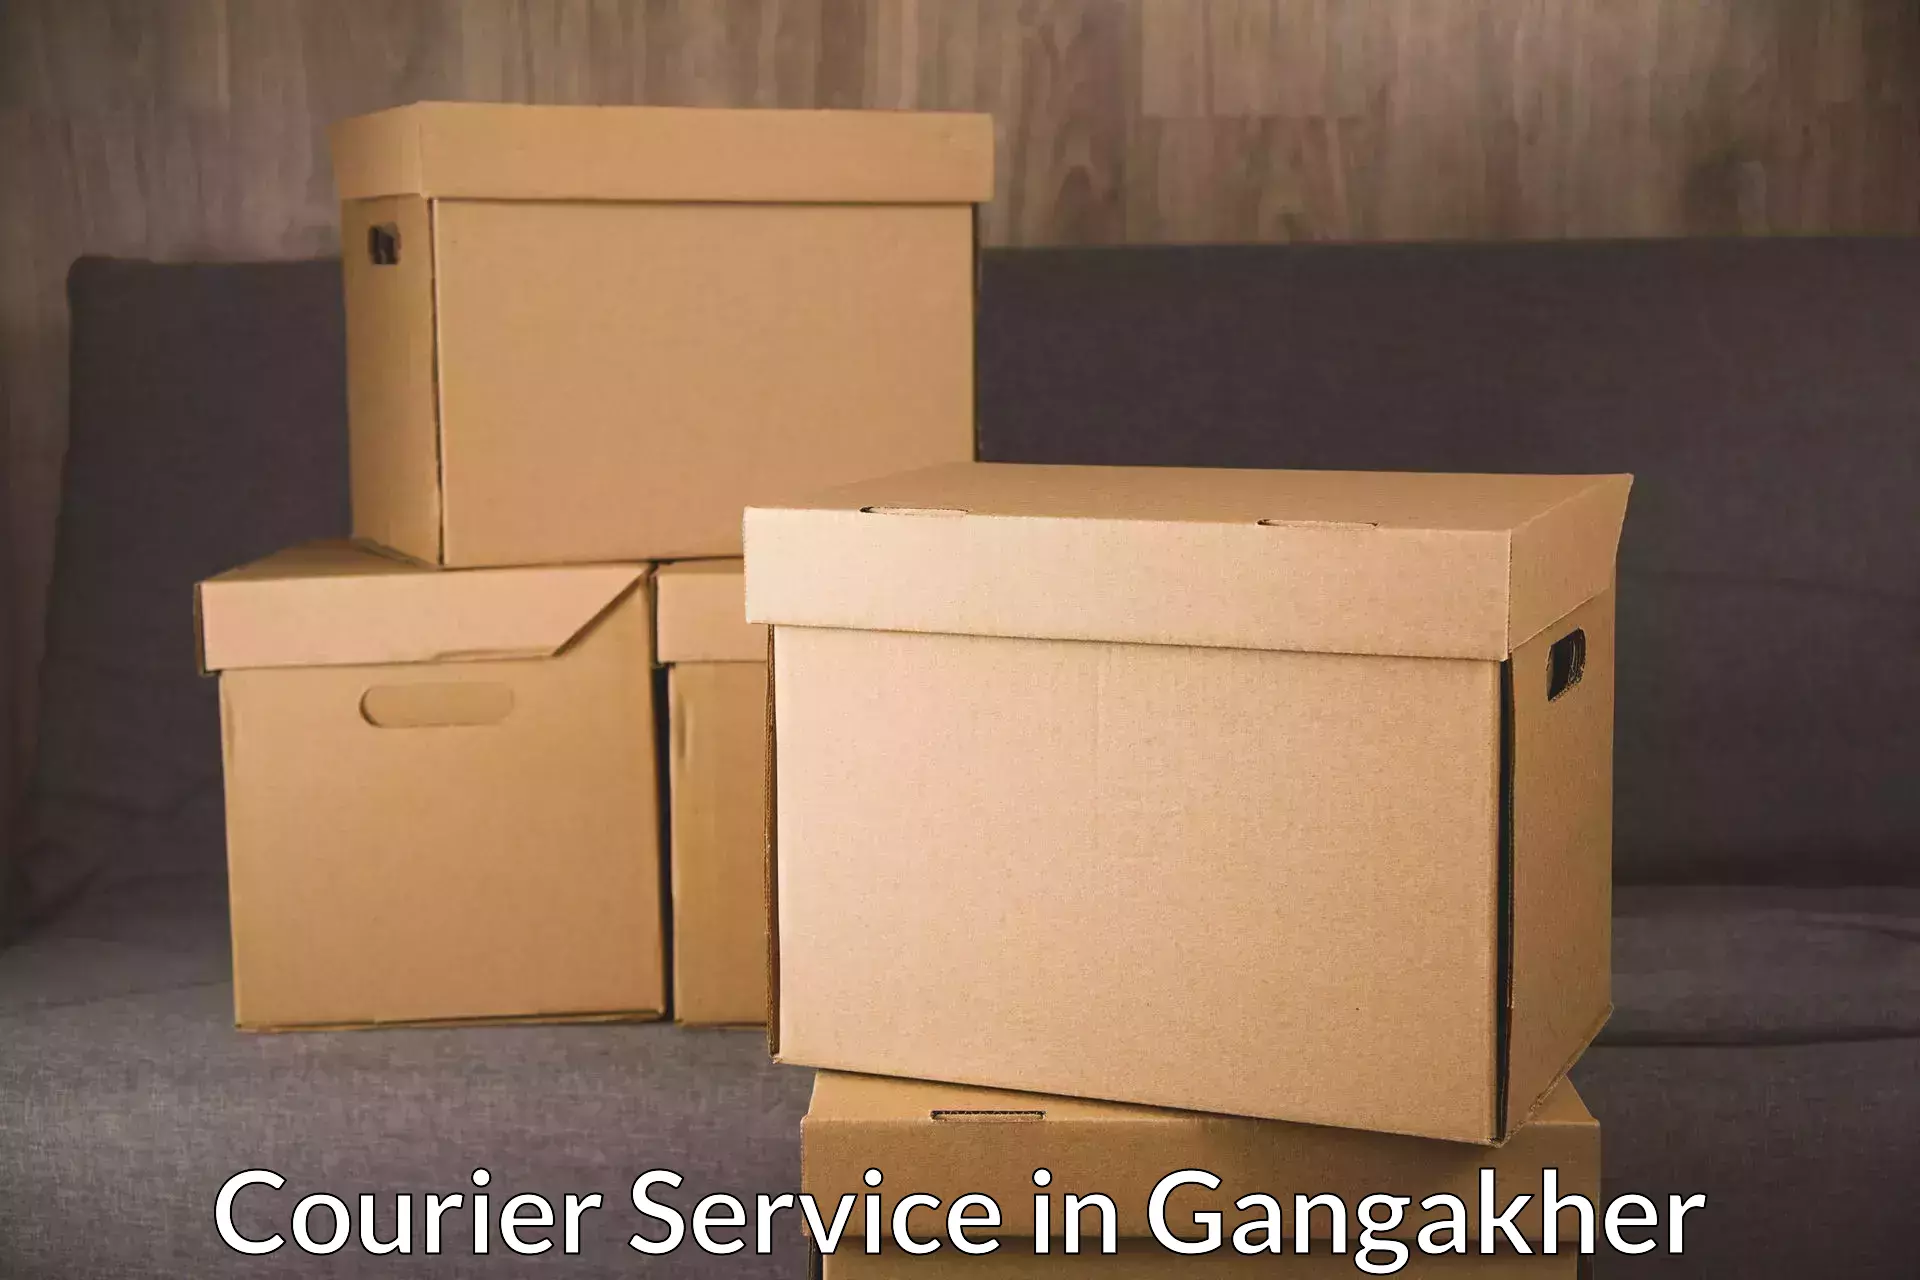 Customer-focused courier in Gangakher